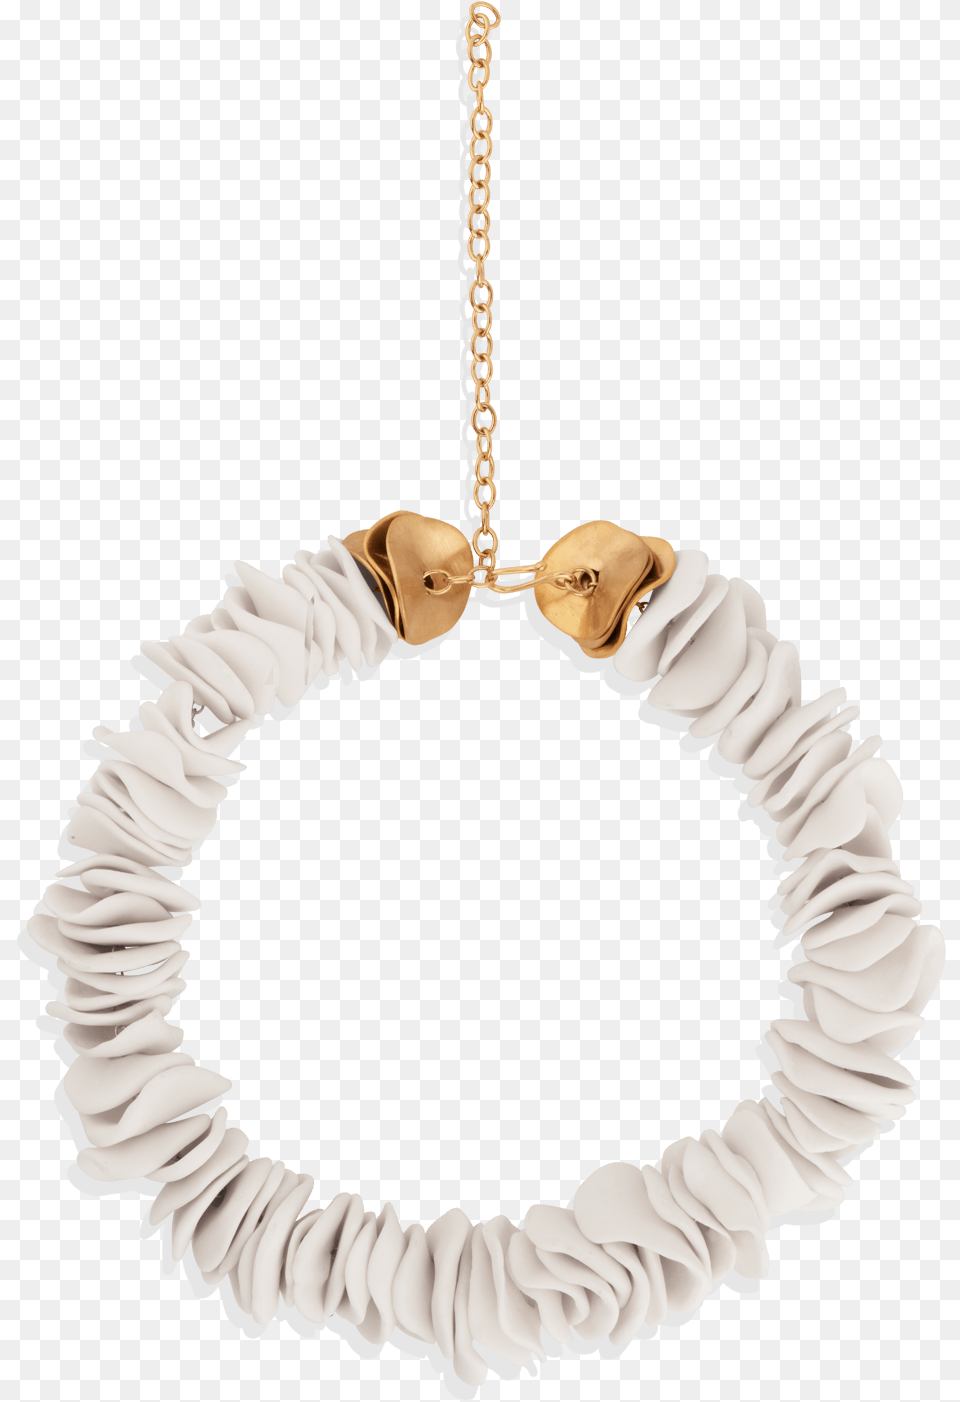 String Of Perils Ceramic Necklace Solid, Accessories, Jewelry, Birthday Cake, Cake Png Image